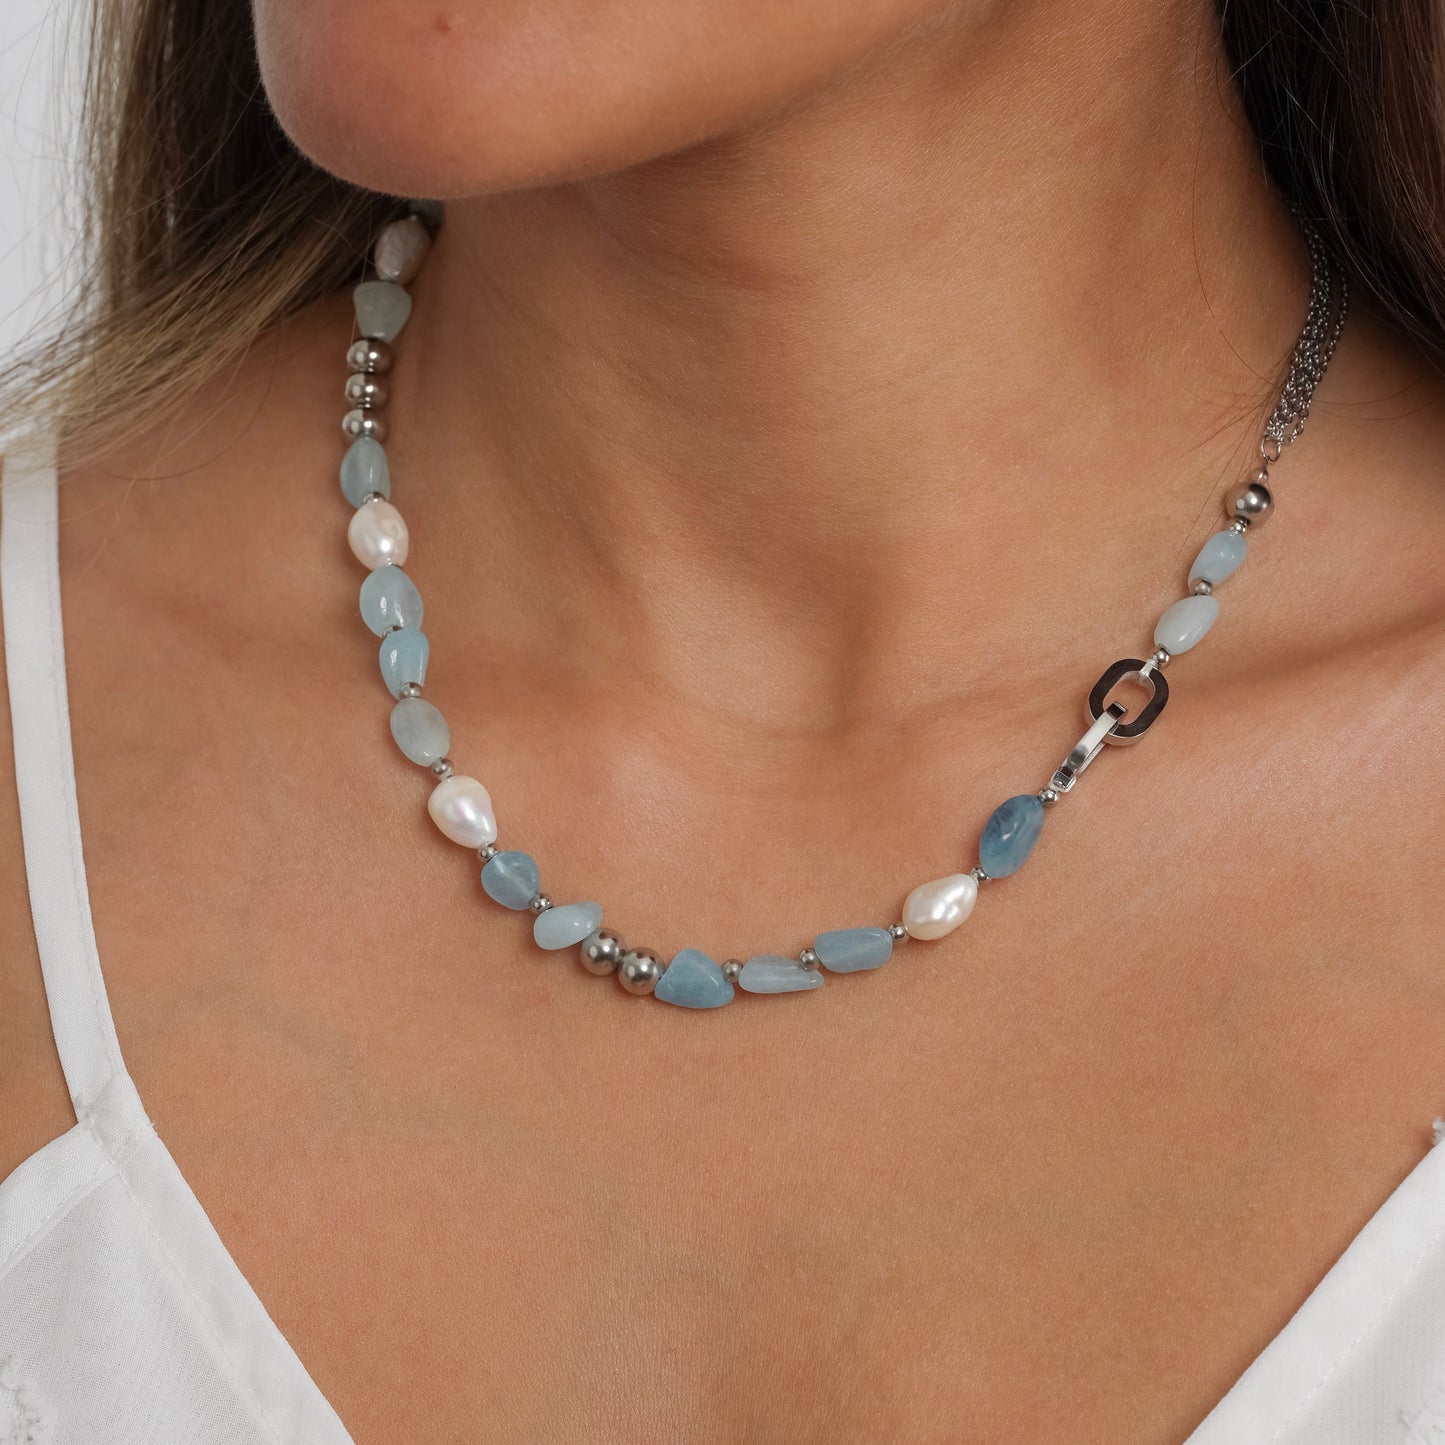 A model in a white dress wearing Aquamarine Stone & Pearl Beaded Necklace. Close-up image of the necklace.